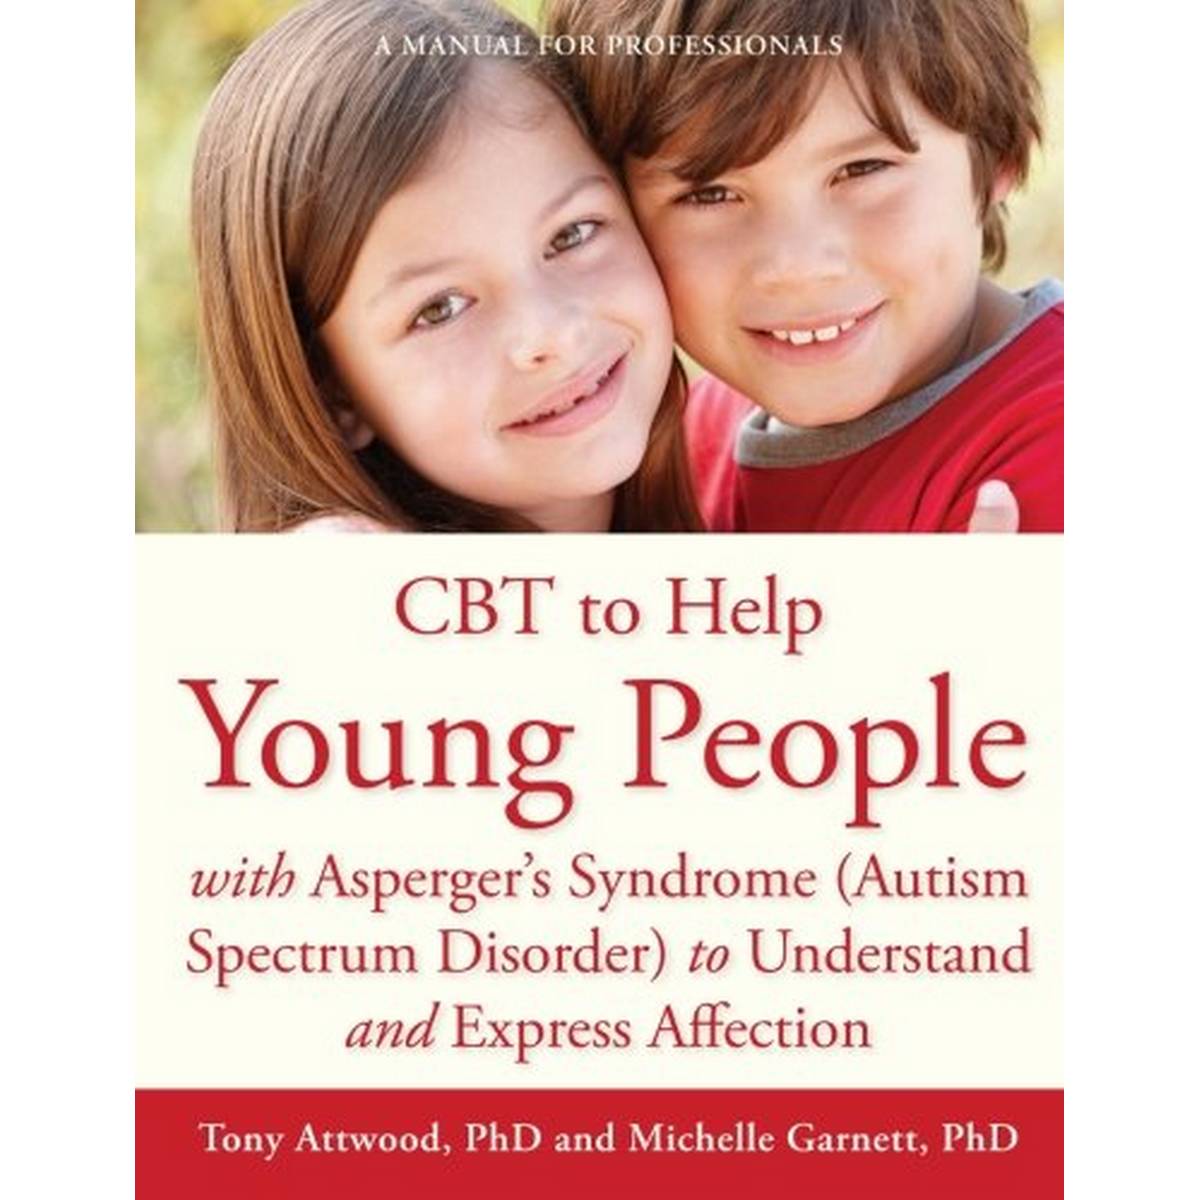 CBT to Help Young People With Asperger's Syndrome (Autism Spectrum Disorder) to Understand and Express Affection